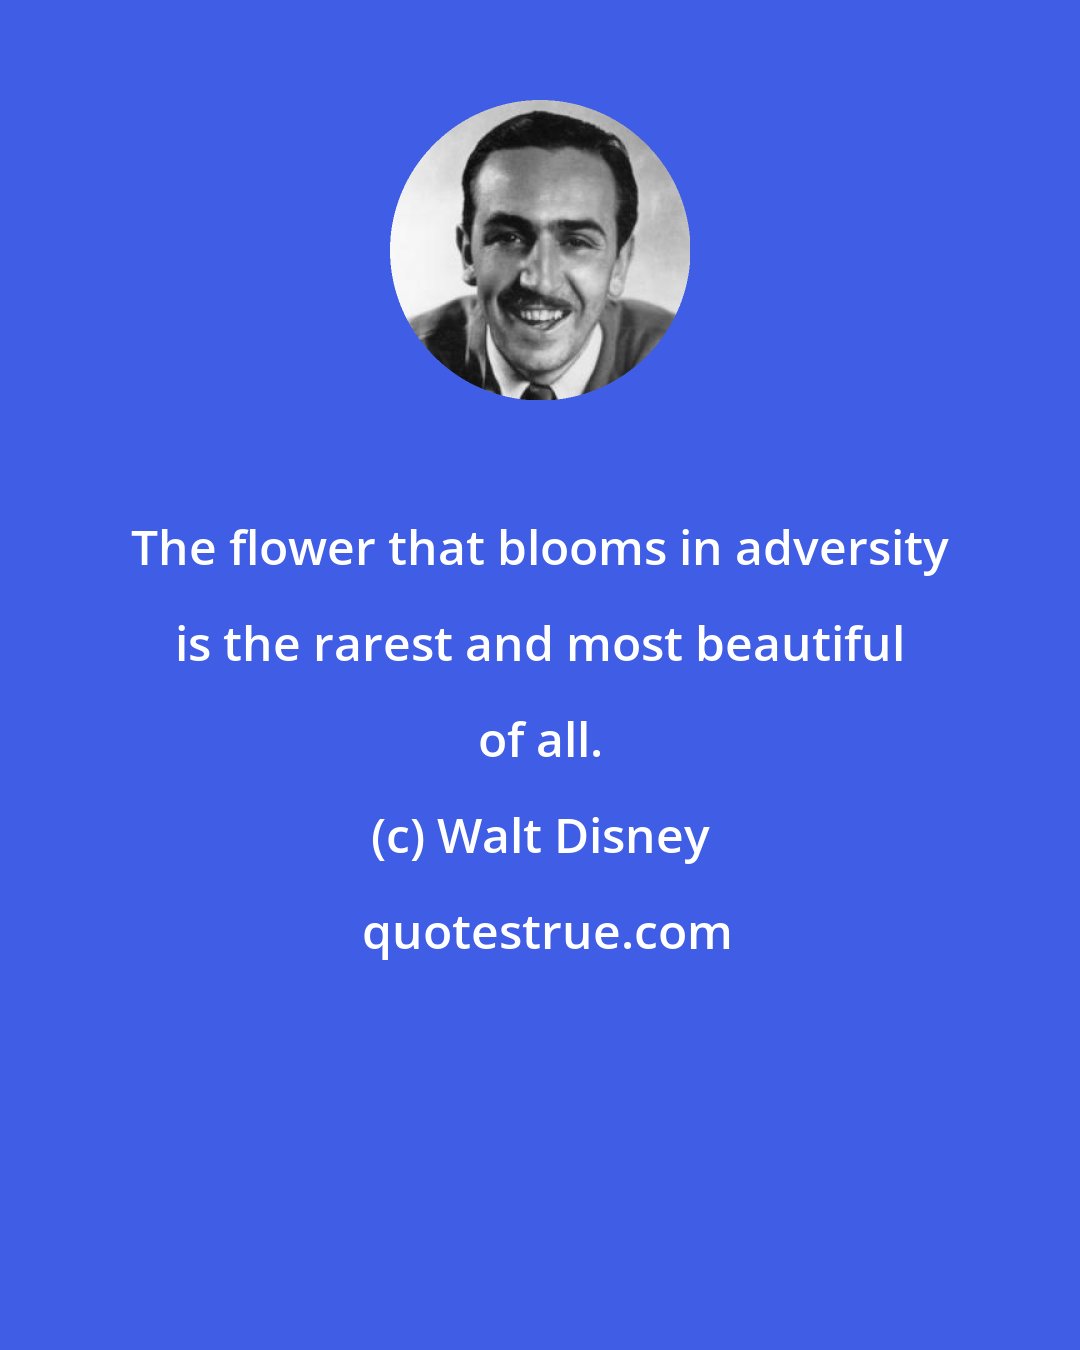 Walt Disney: The flower that blooms in adversity is the rarest and most beautiful of all.